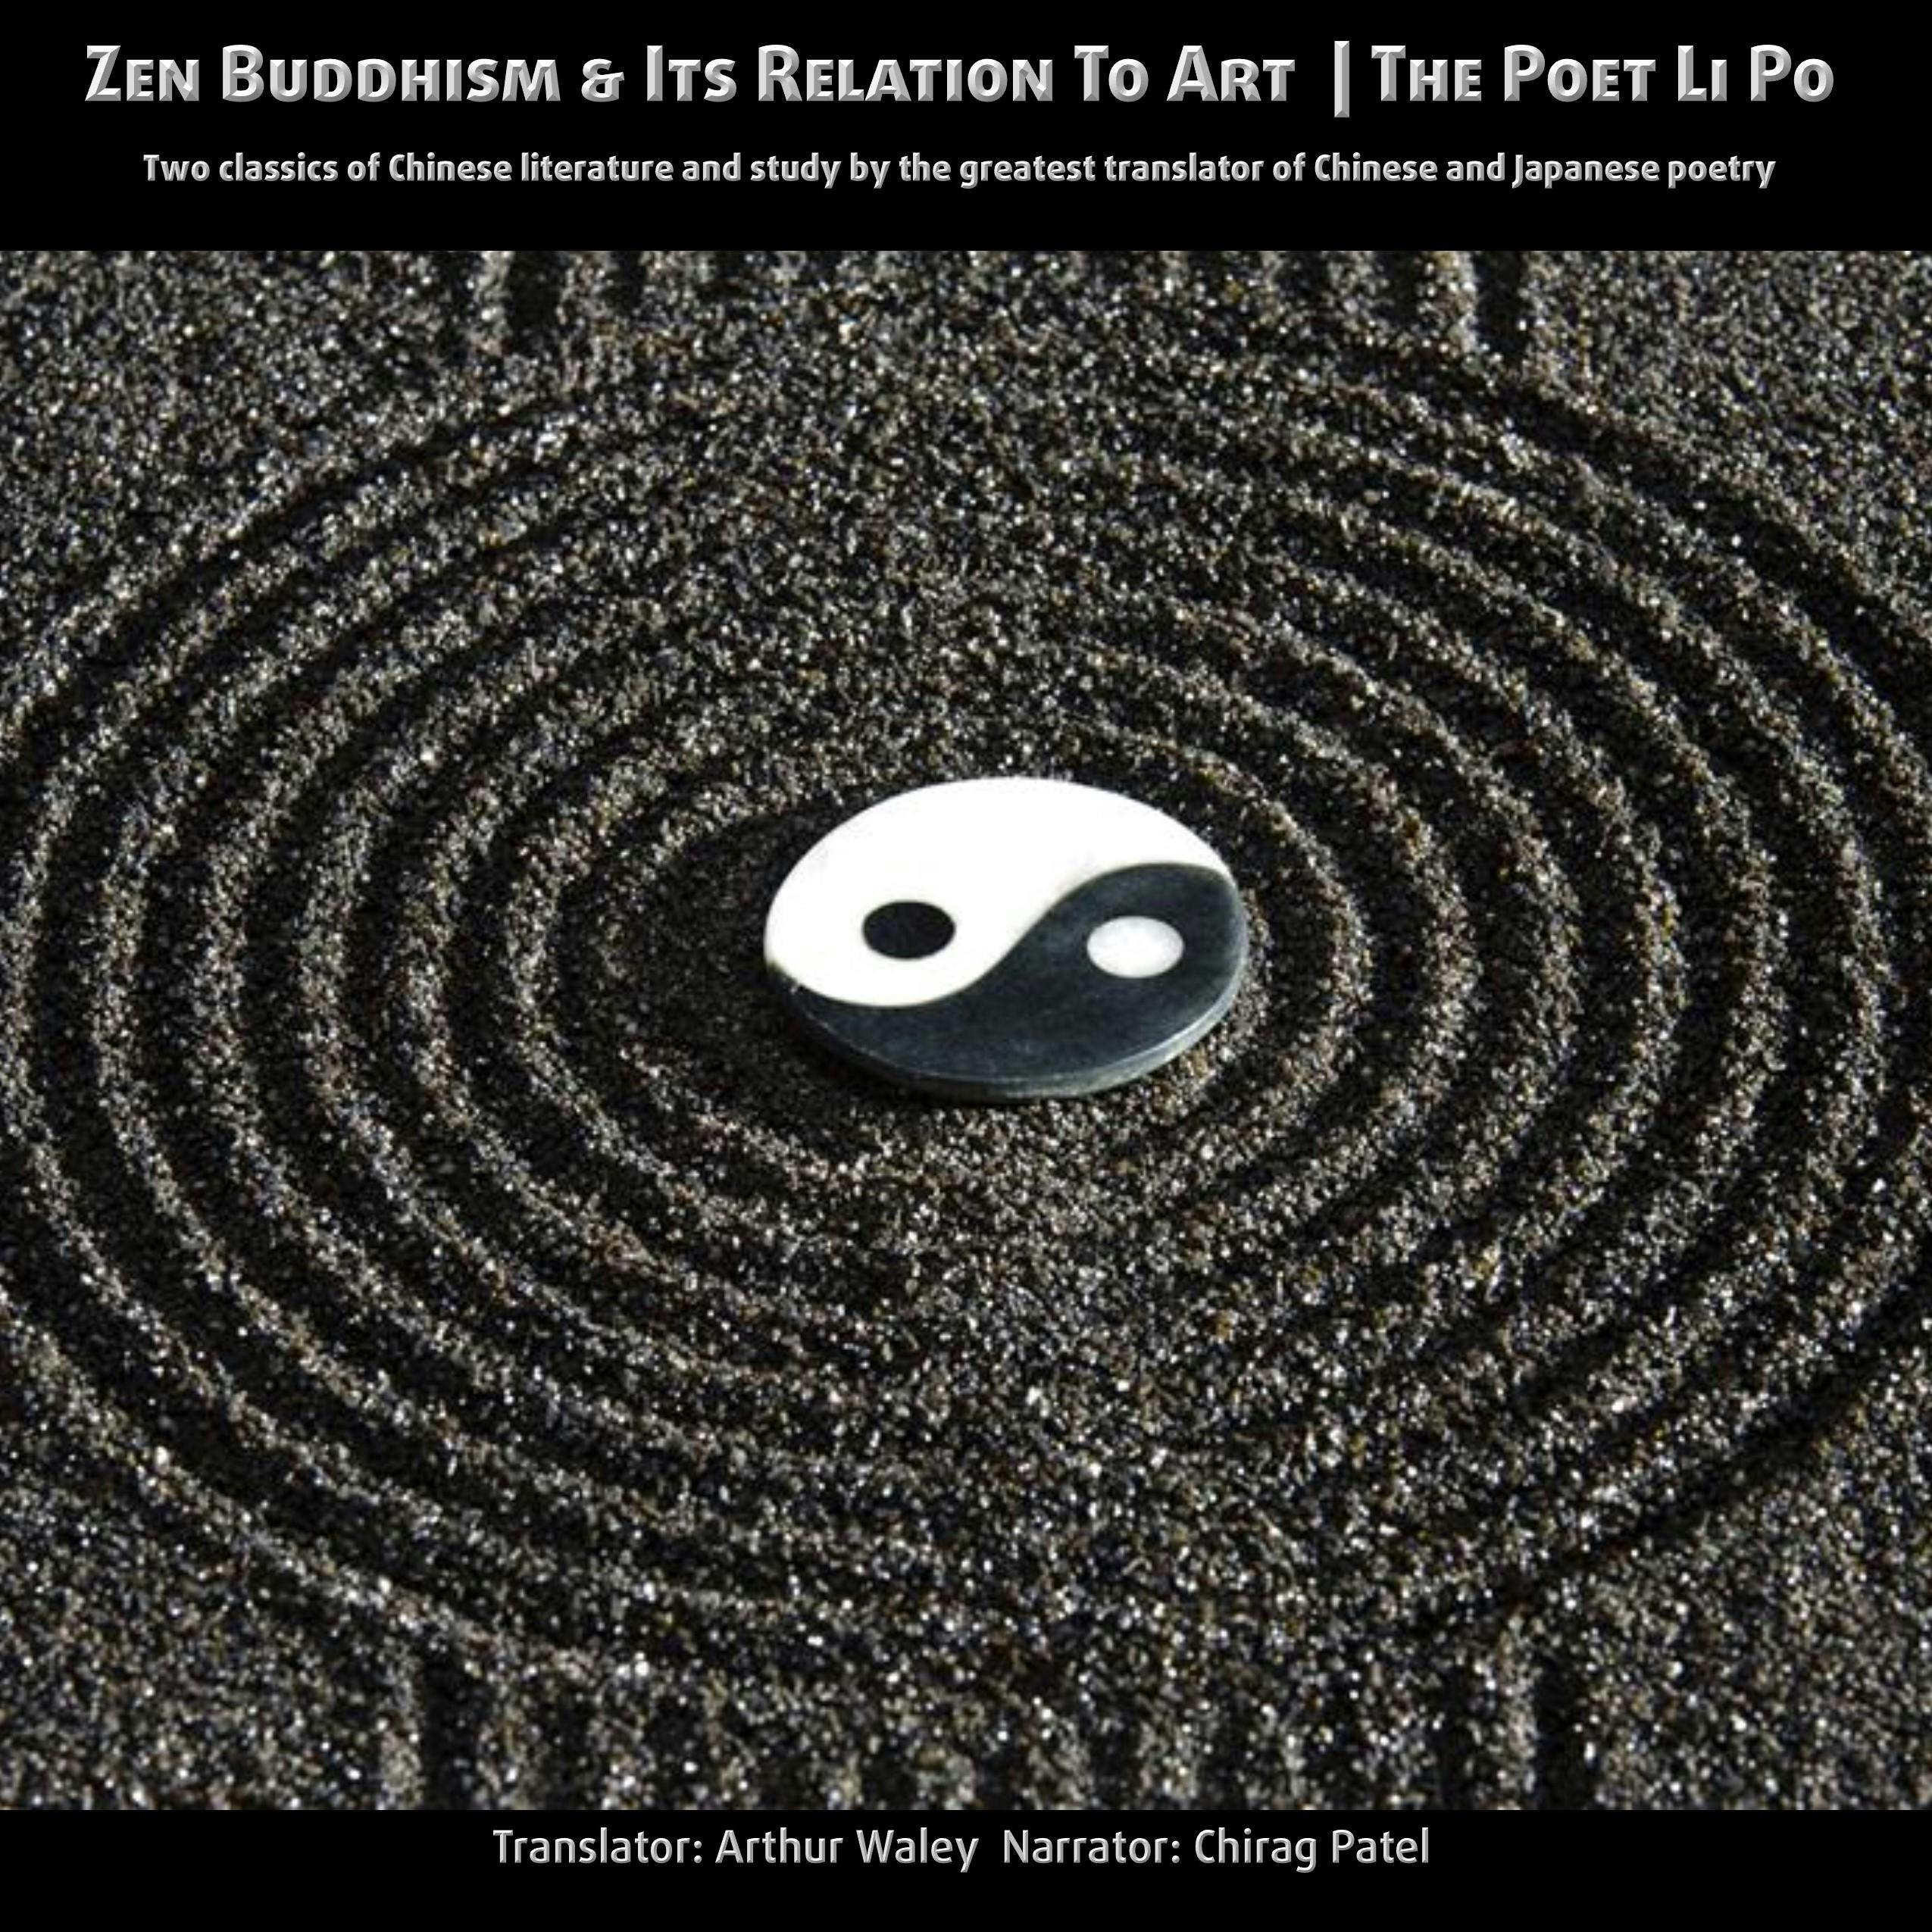 Zen Buddhism and Its relation to Art | The Poet Li Po: Two classics of Chinese literature and study by the greatest translator of Chinese poetry - undefined